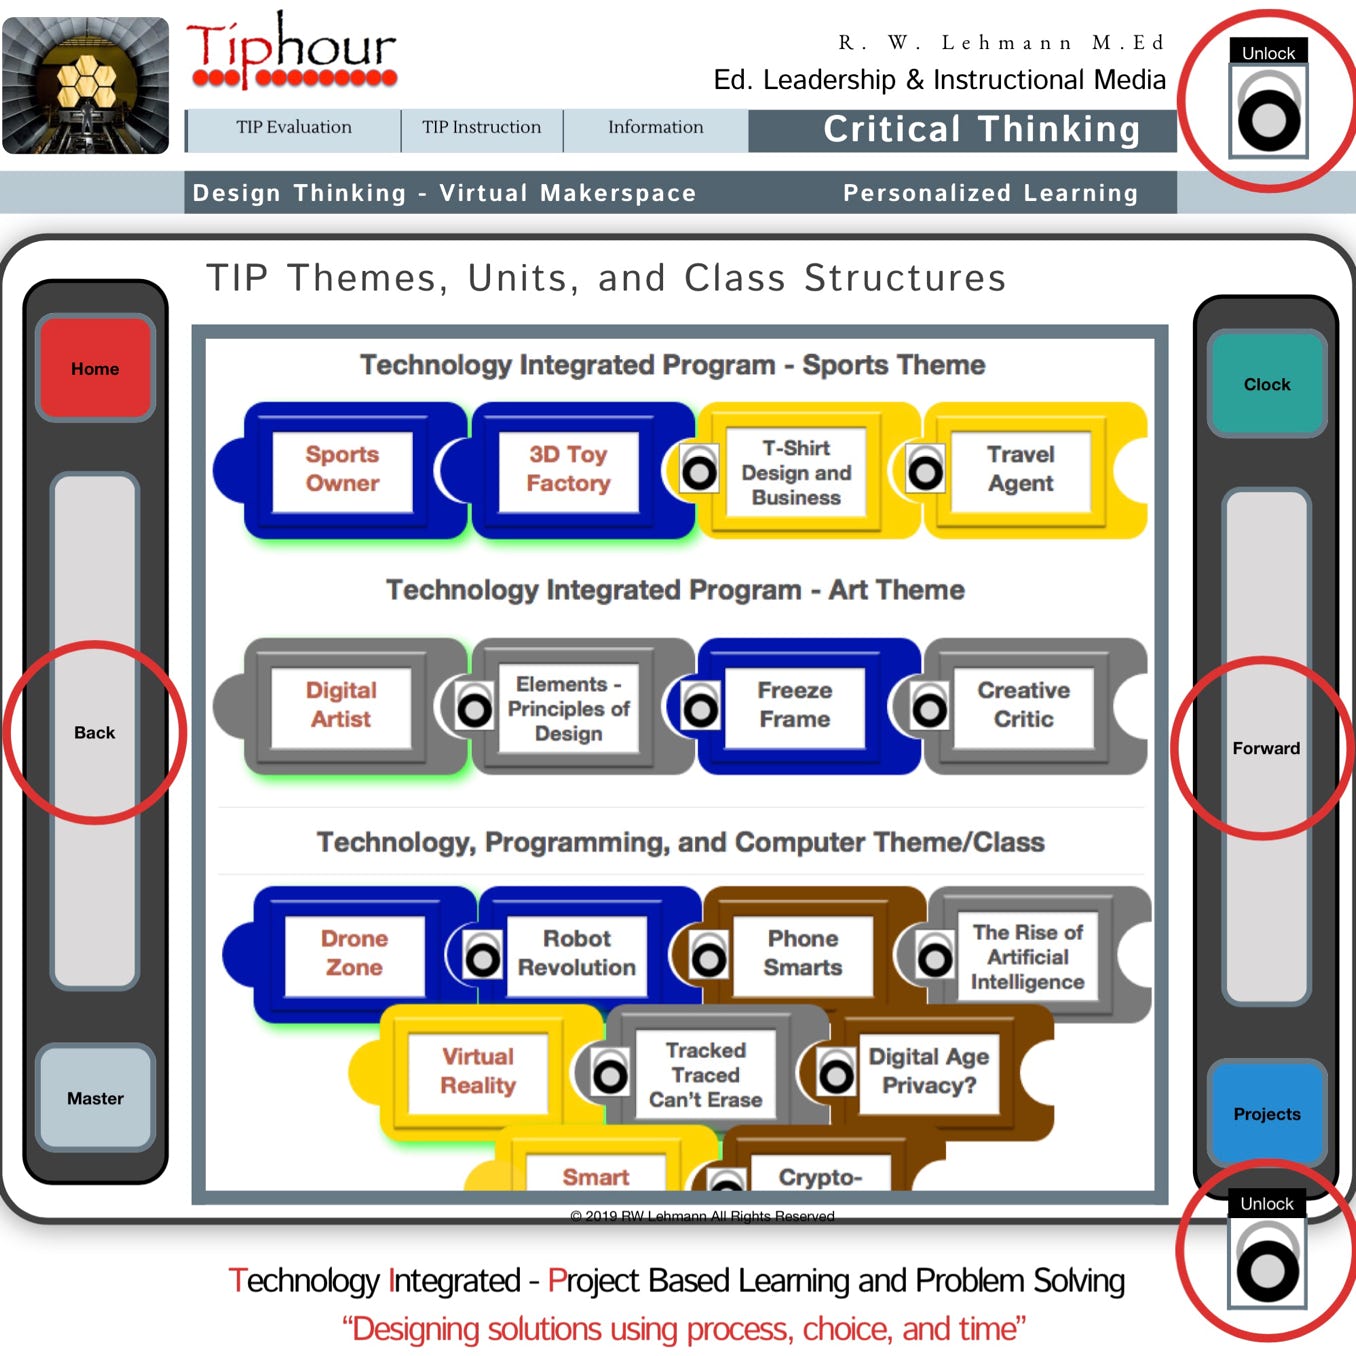 Online learning Virtual Makerspace Design thinking Critical Thinking PBL